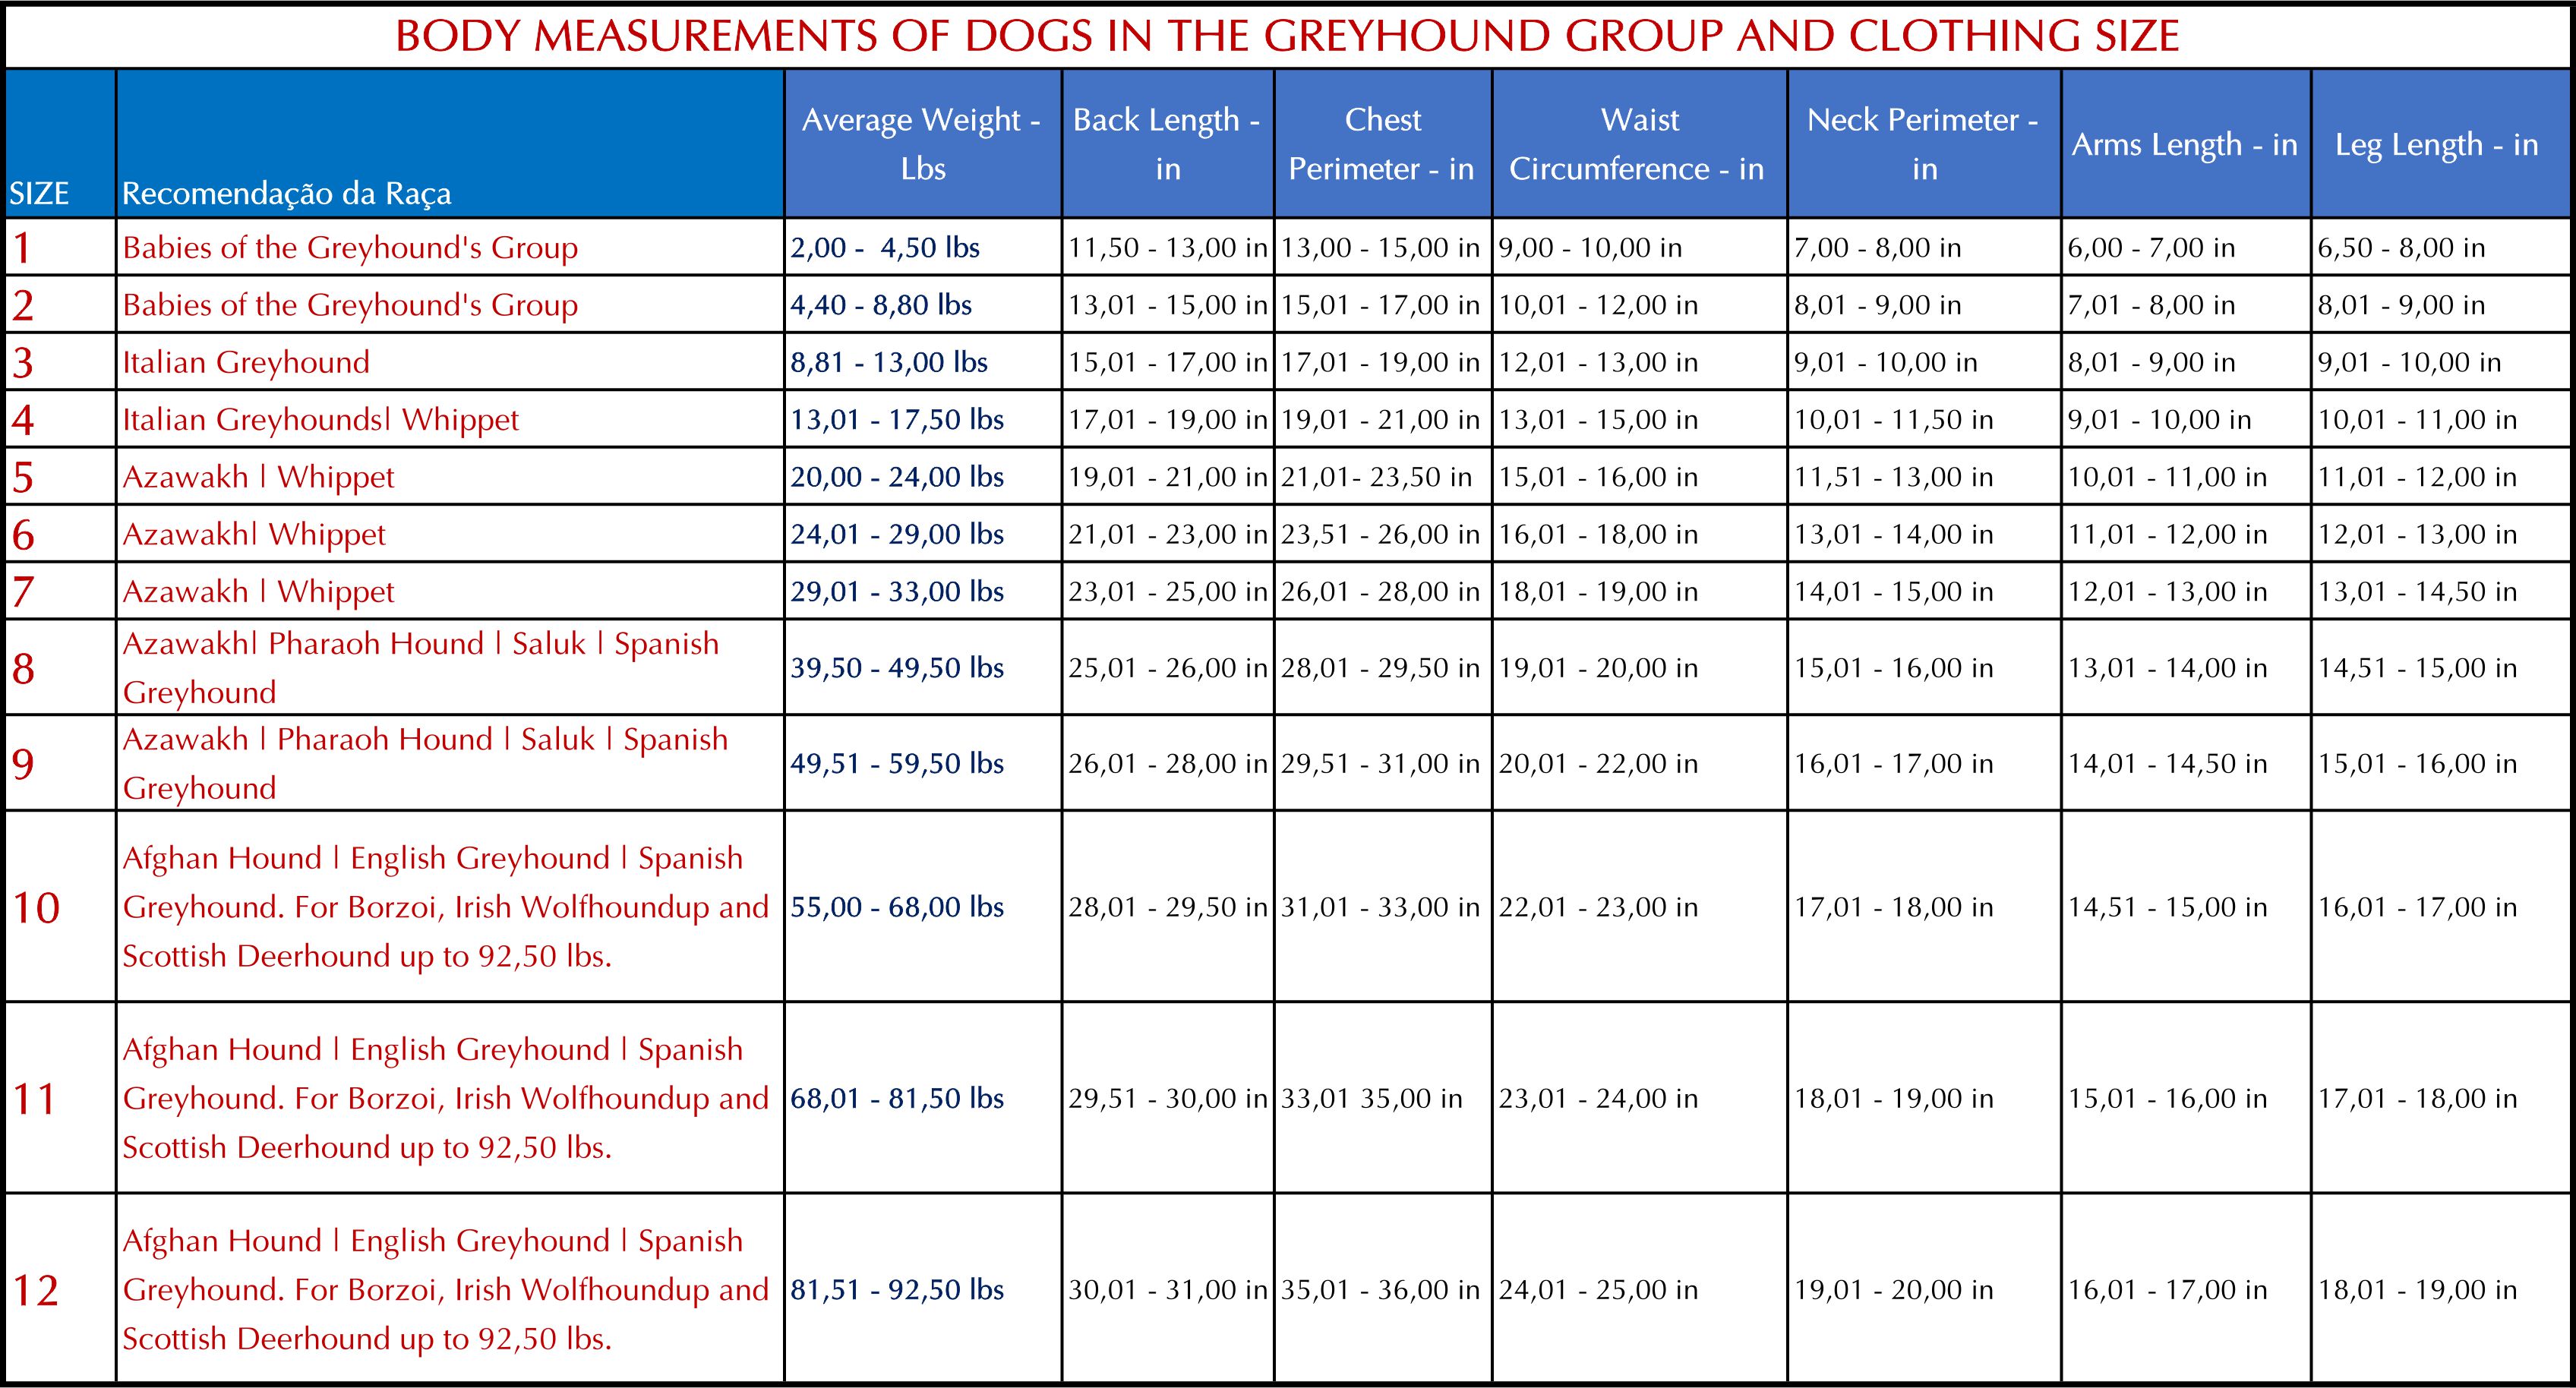 BODY MEASUREMENTS OF DOGS IN THE GREYHOUND GROUP AND CLOTHING SIZE